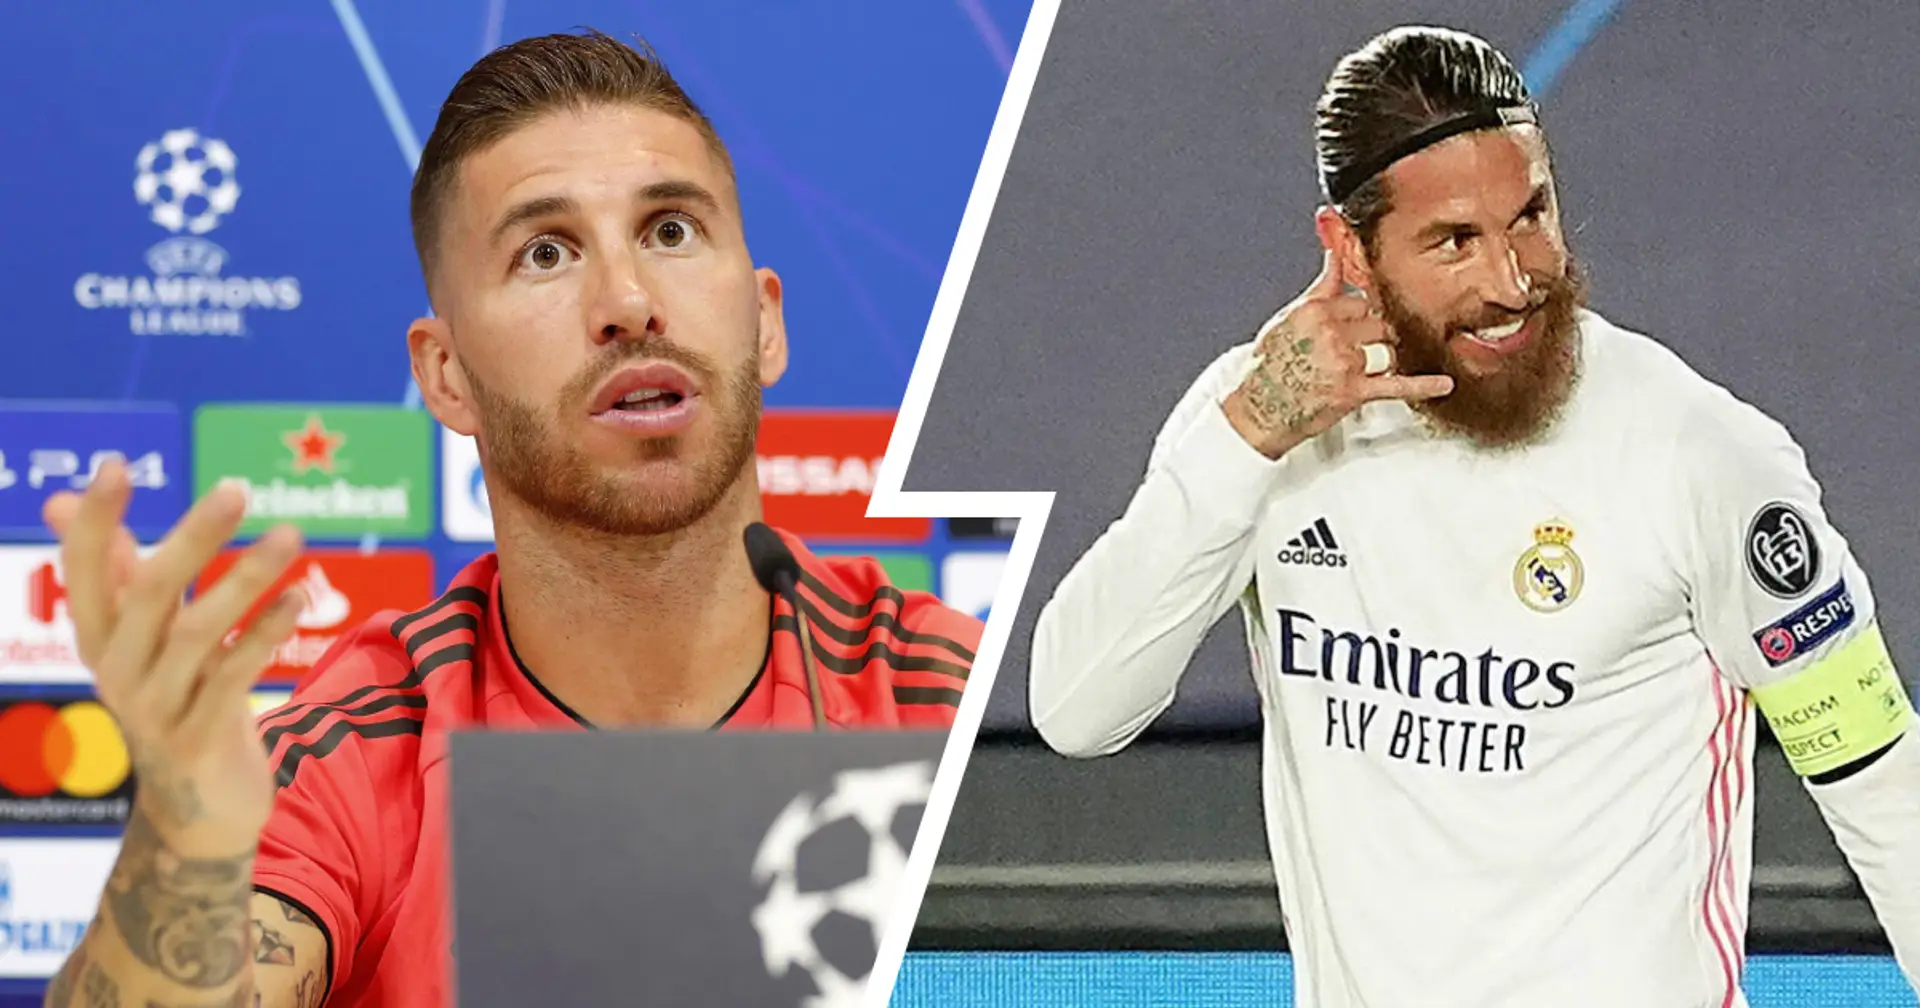 'I considered it for a while': here's what Sergio Ramos said about Man United in the past